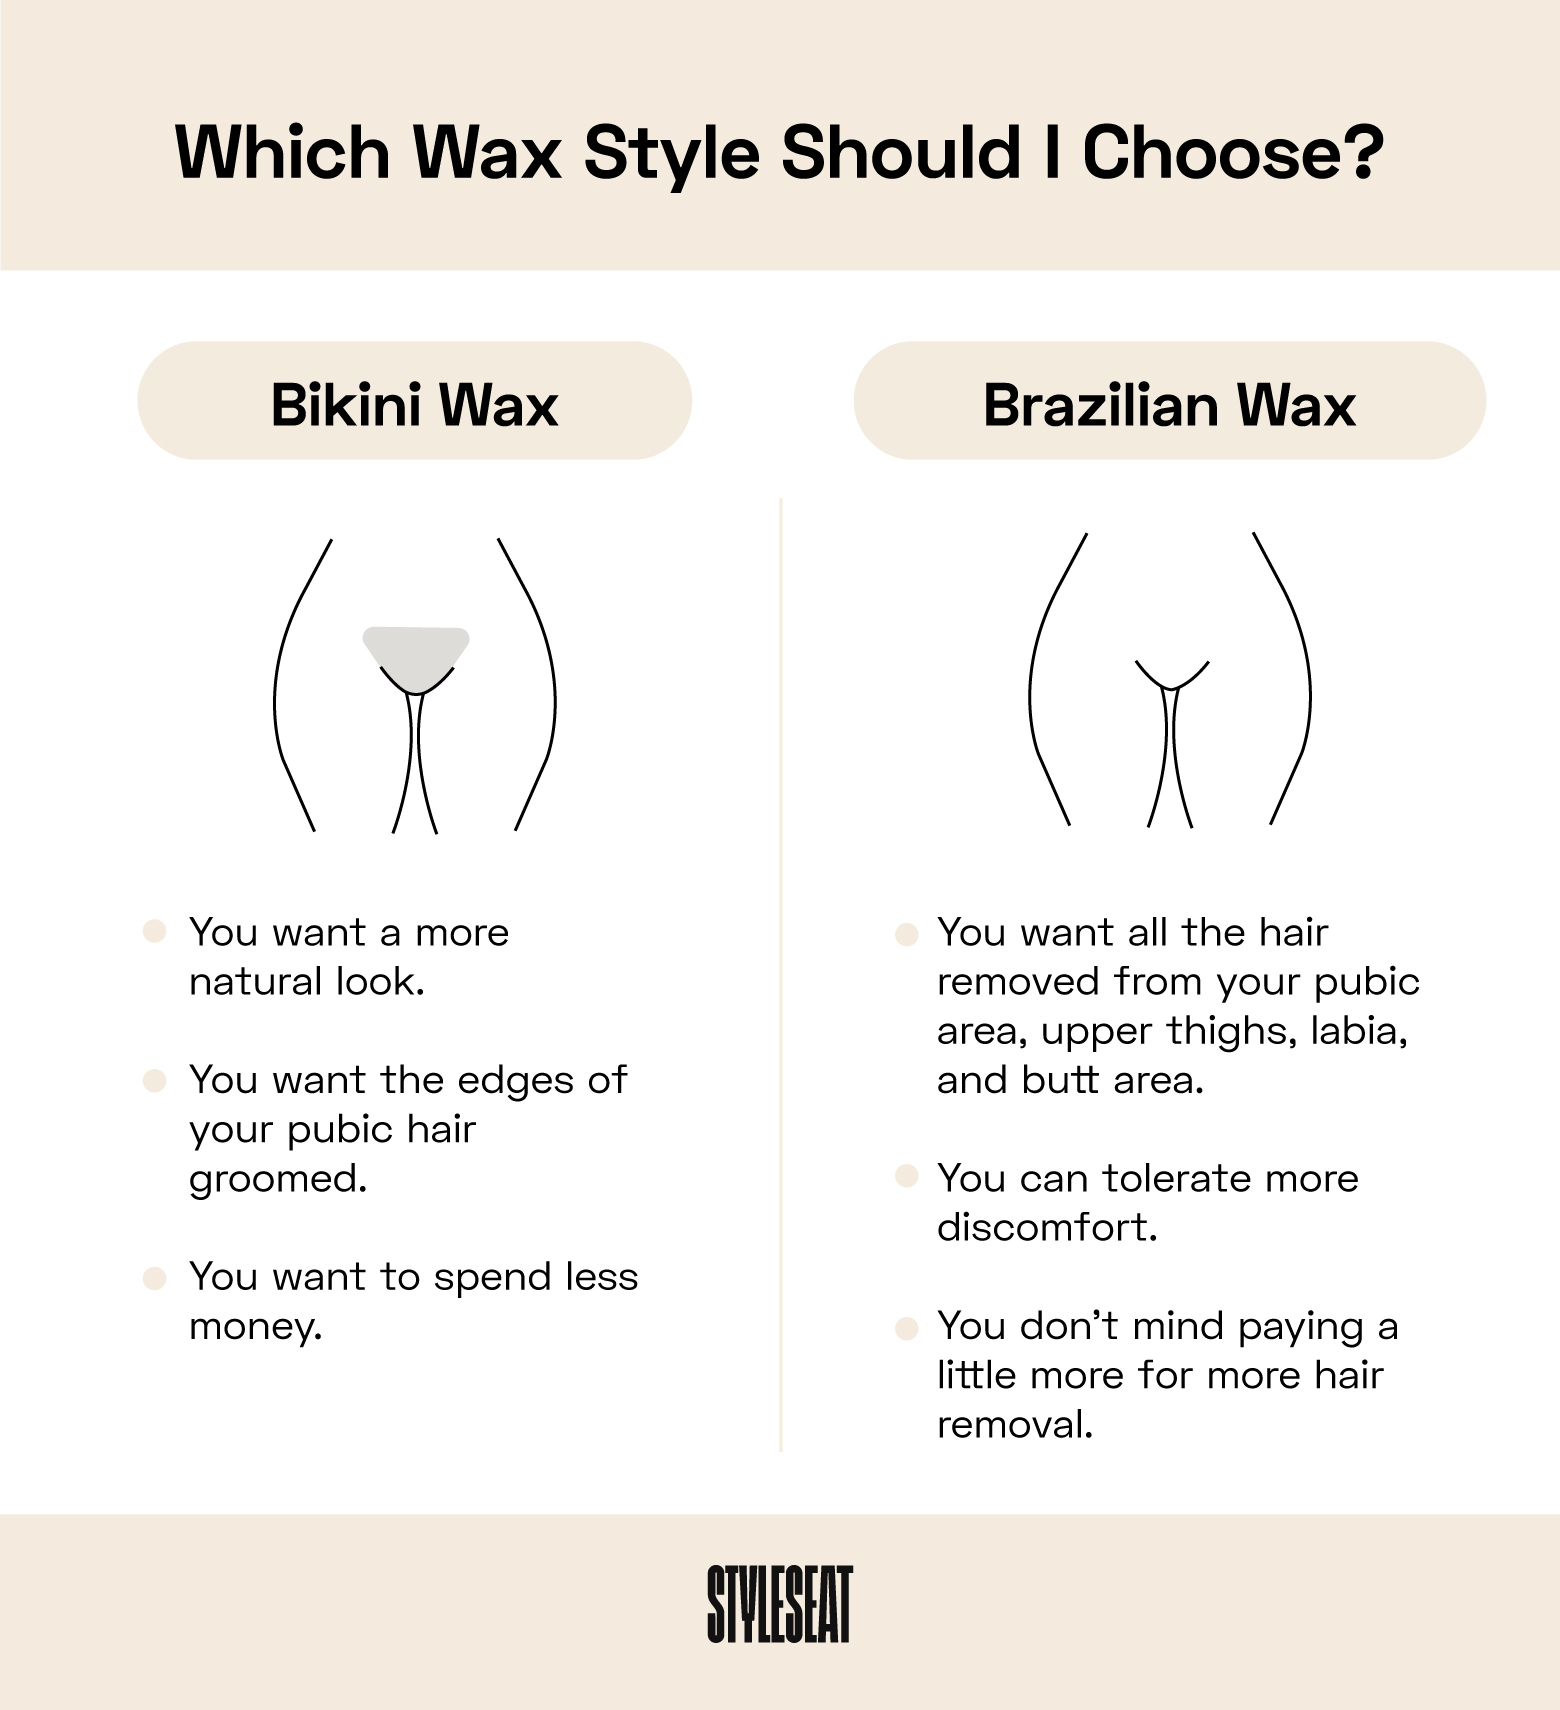 which wax style should I choose